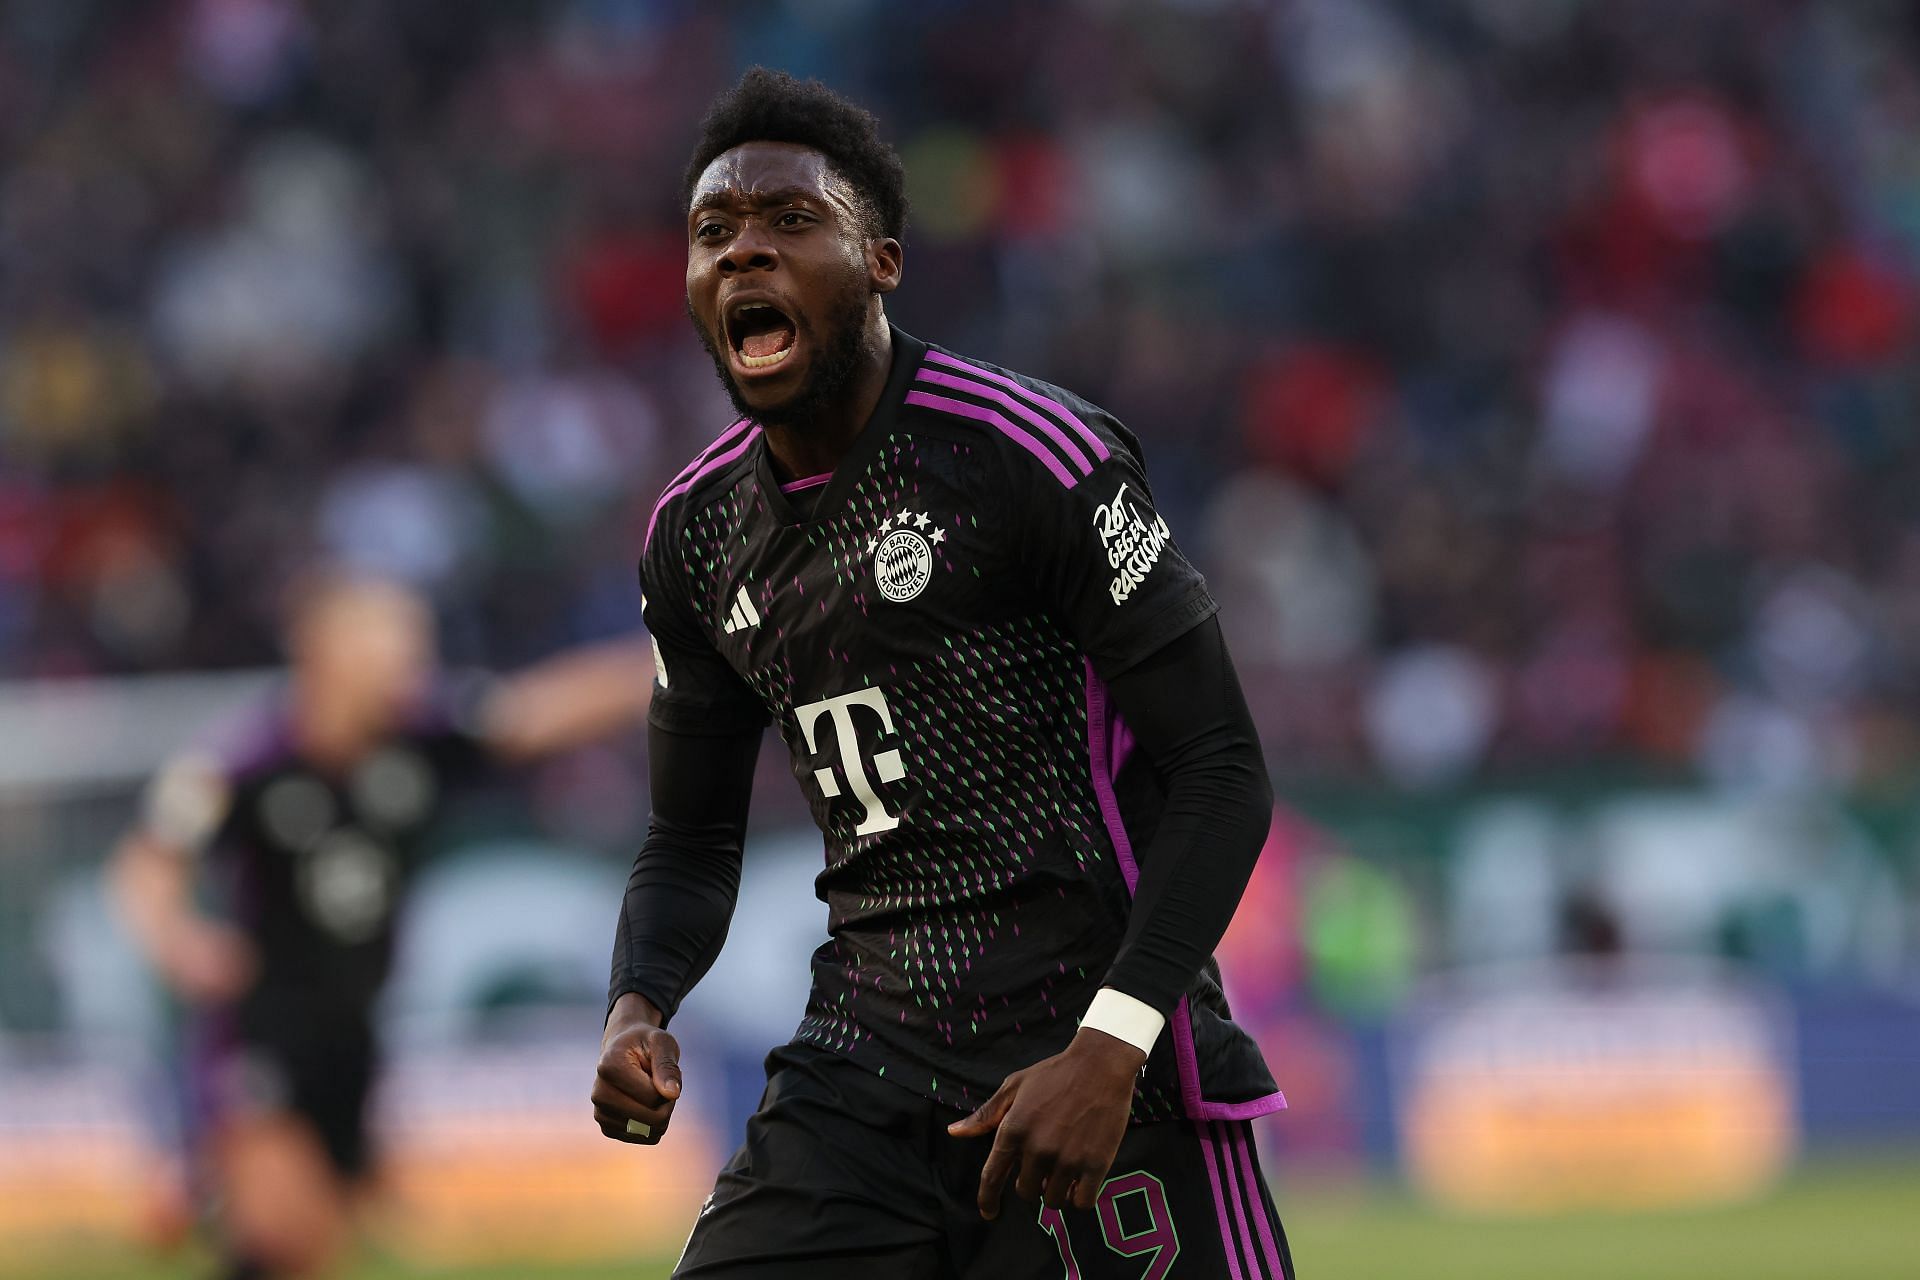 Bayern Munich eye Manchester United target amid reports of Alphonso Davies agreeing terms with Real Madrid - Reports